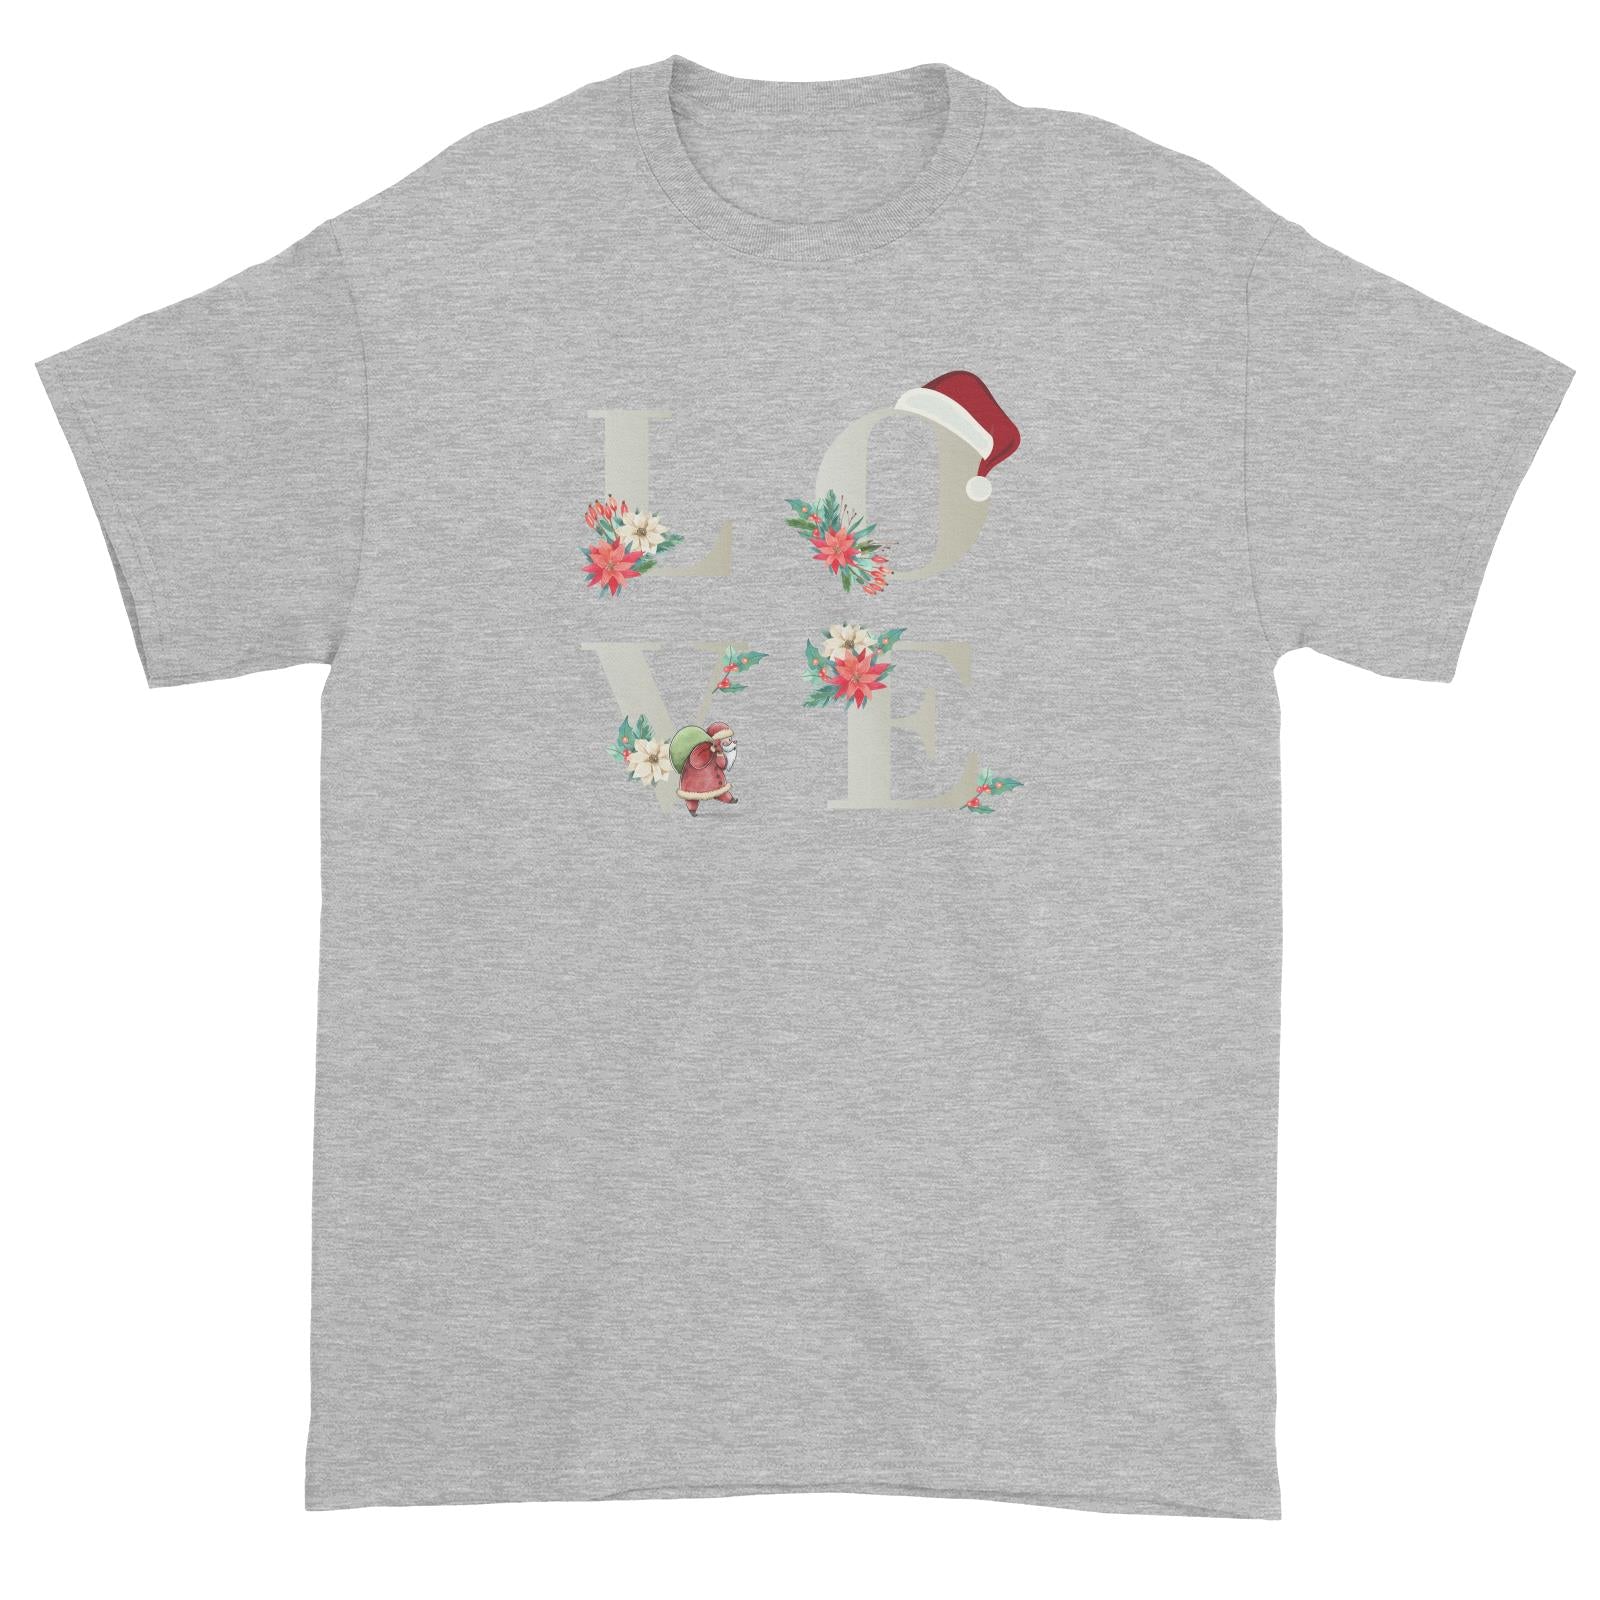 LOVE with Christmas Elements Unisex T-Shirt  Matching Family Personalisable Designs